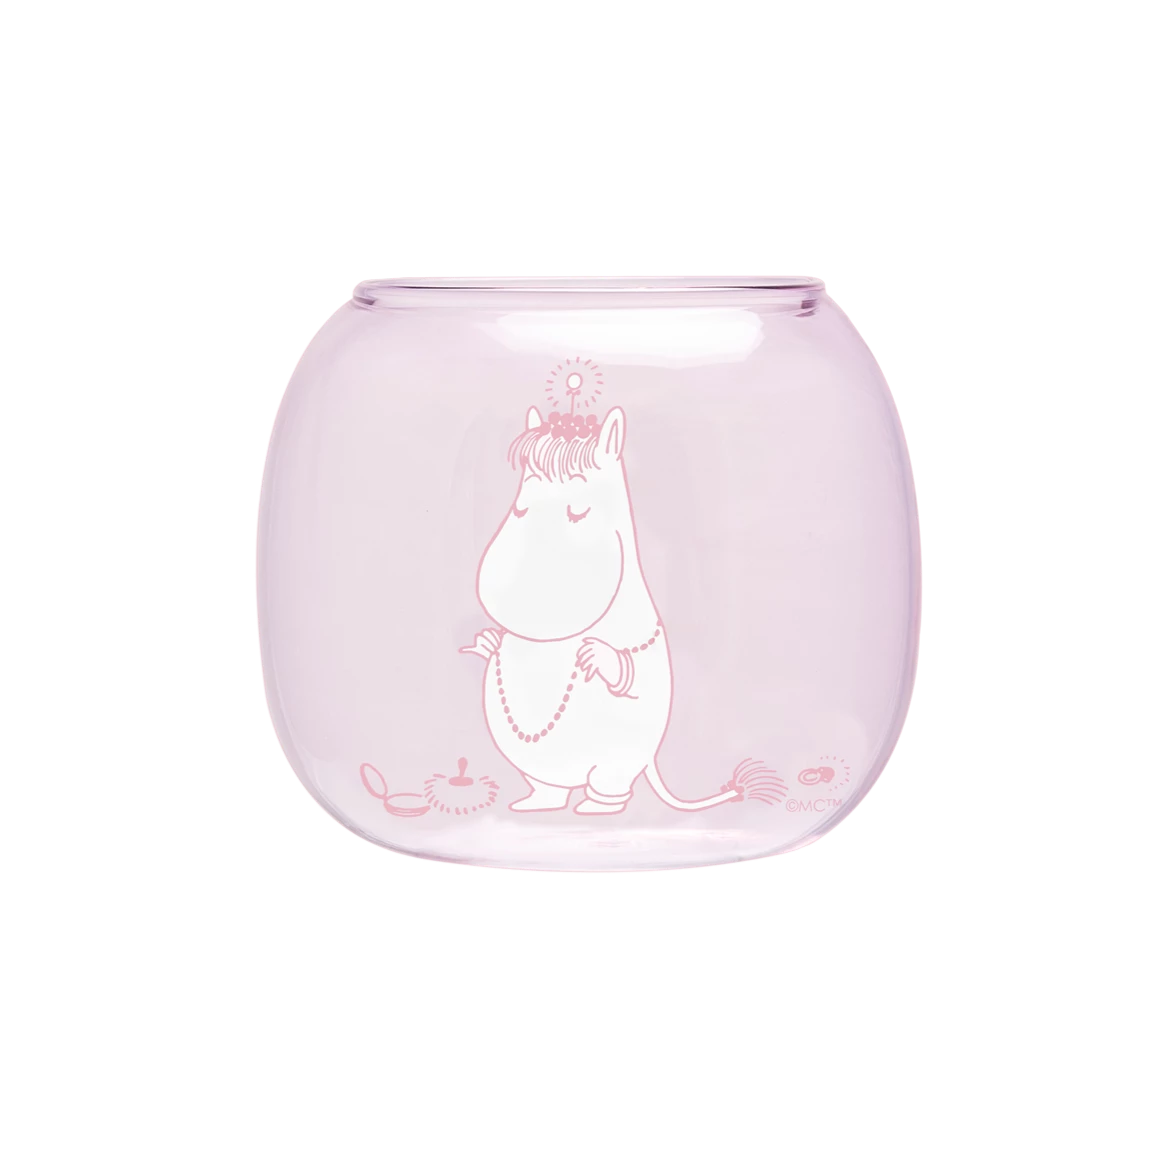 MOOMIN - Tealight Candle Holder, Snorkmaiden, Pink. By Muurla Design